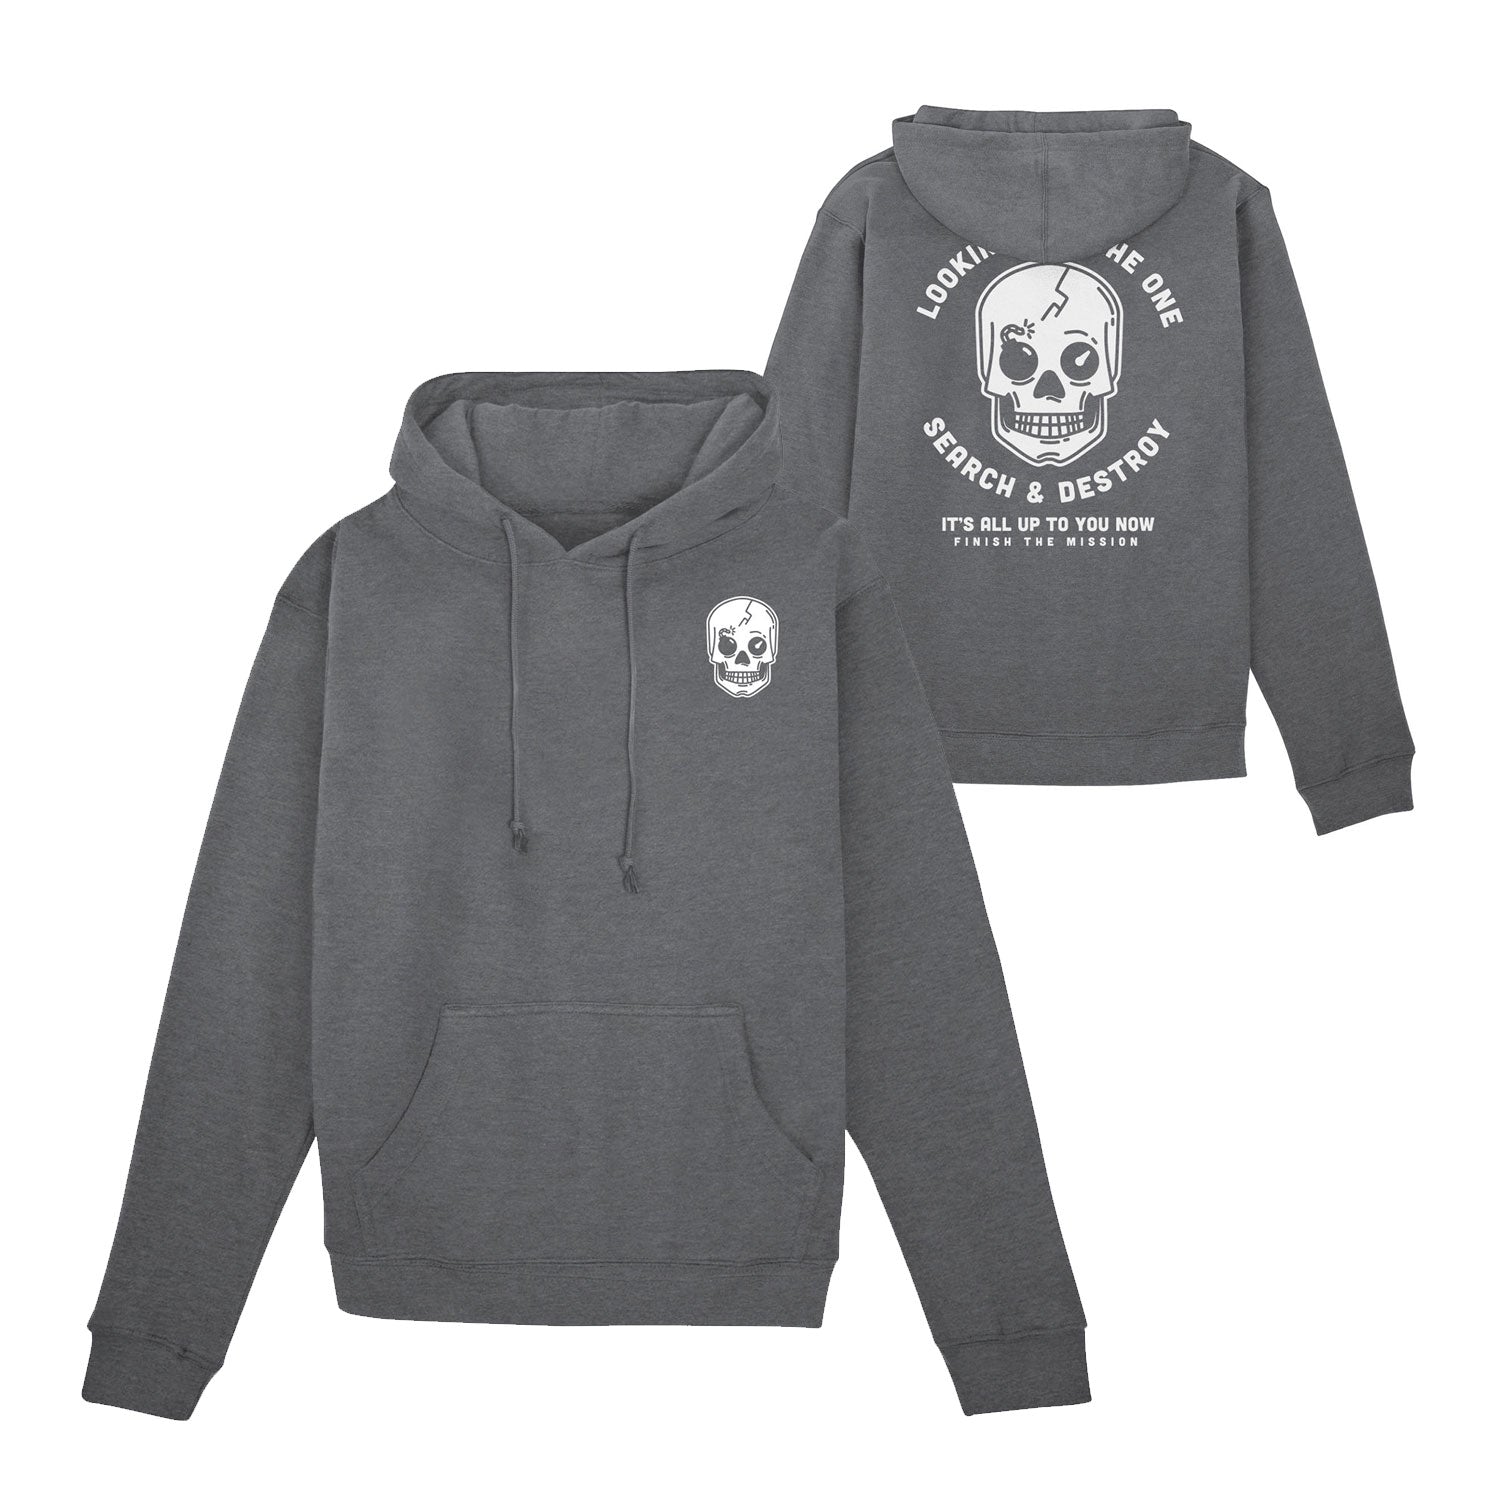 Call of Duty Search & Destroy Skull Logo Grey Hoodie - Front and back views